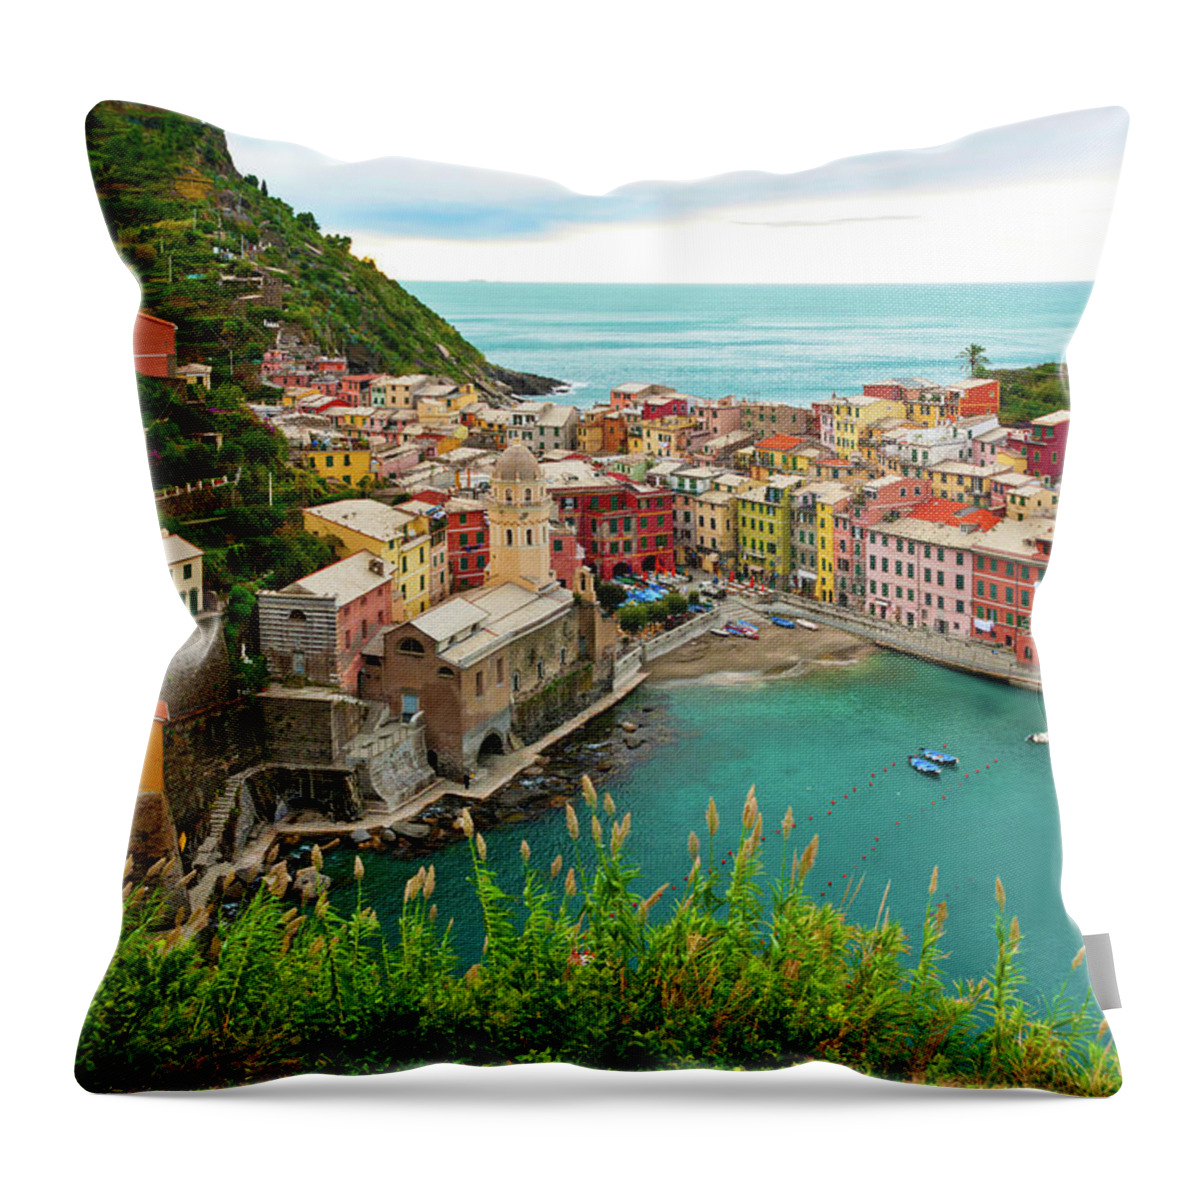 Vernazza Throw Pillow featuring the photograph Vernazza - Cinque Terre, Italy by Denise Strahm